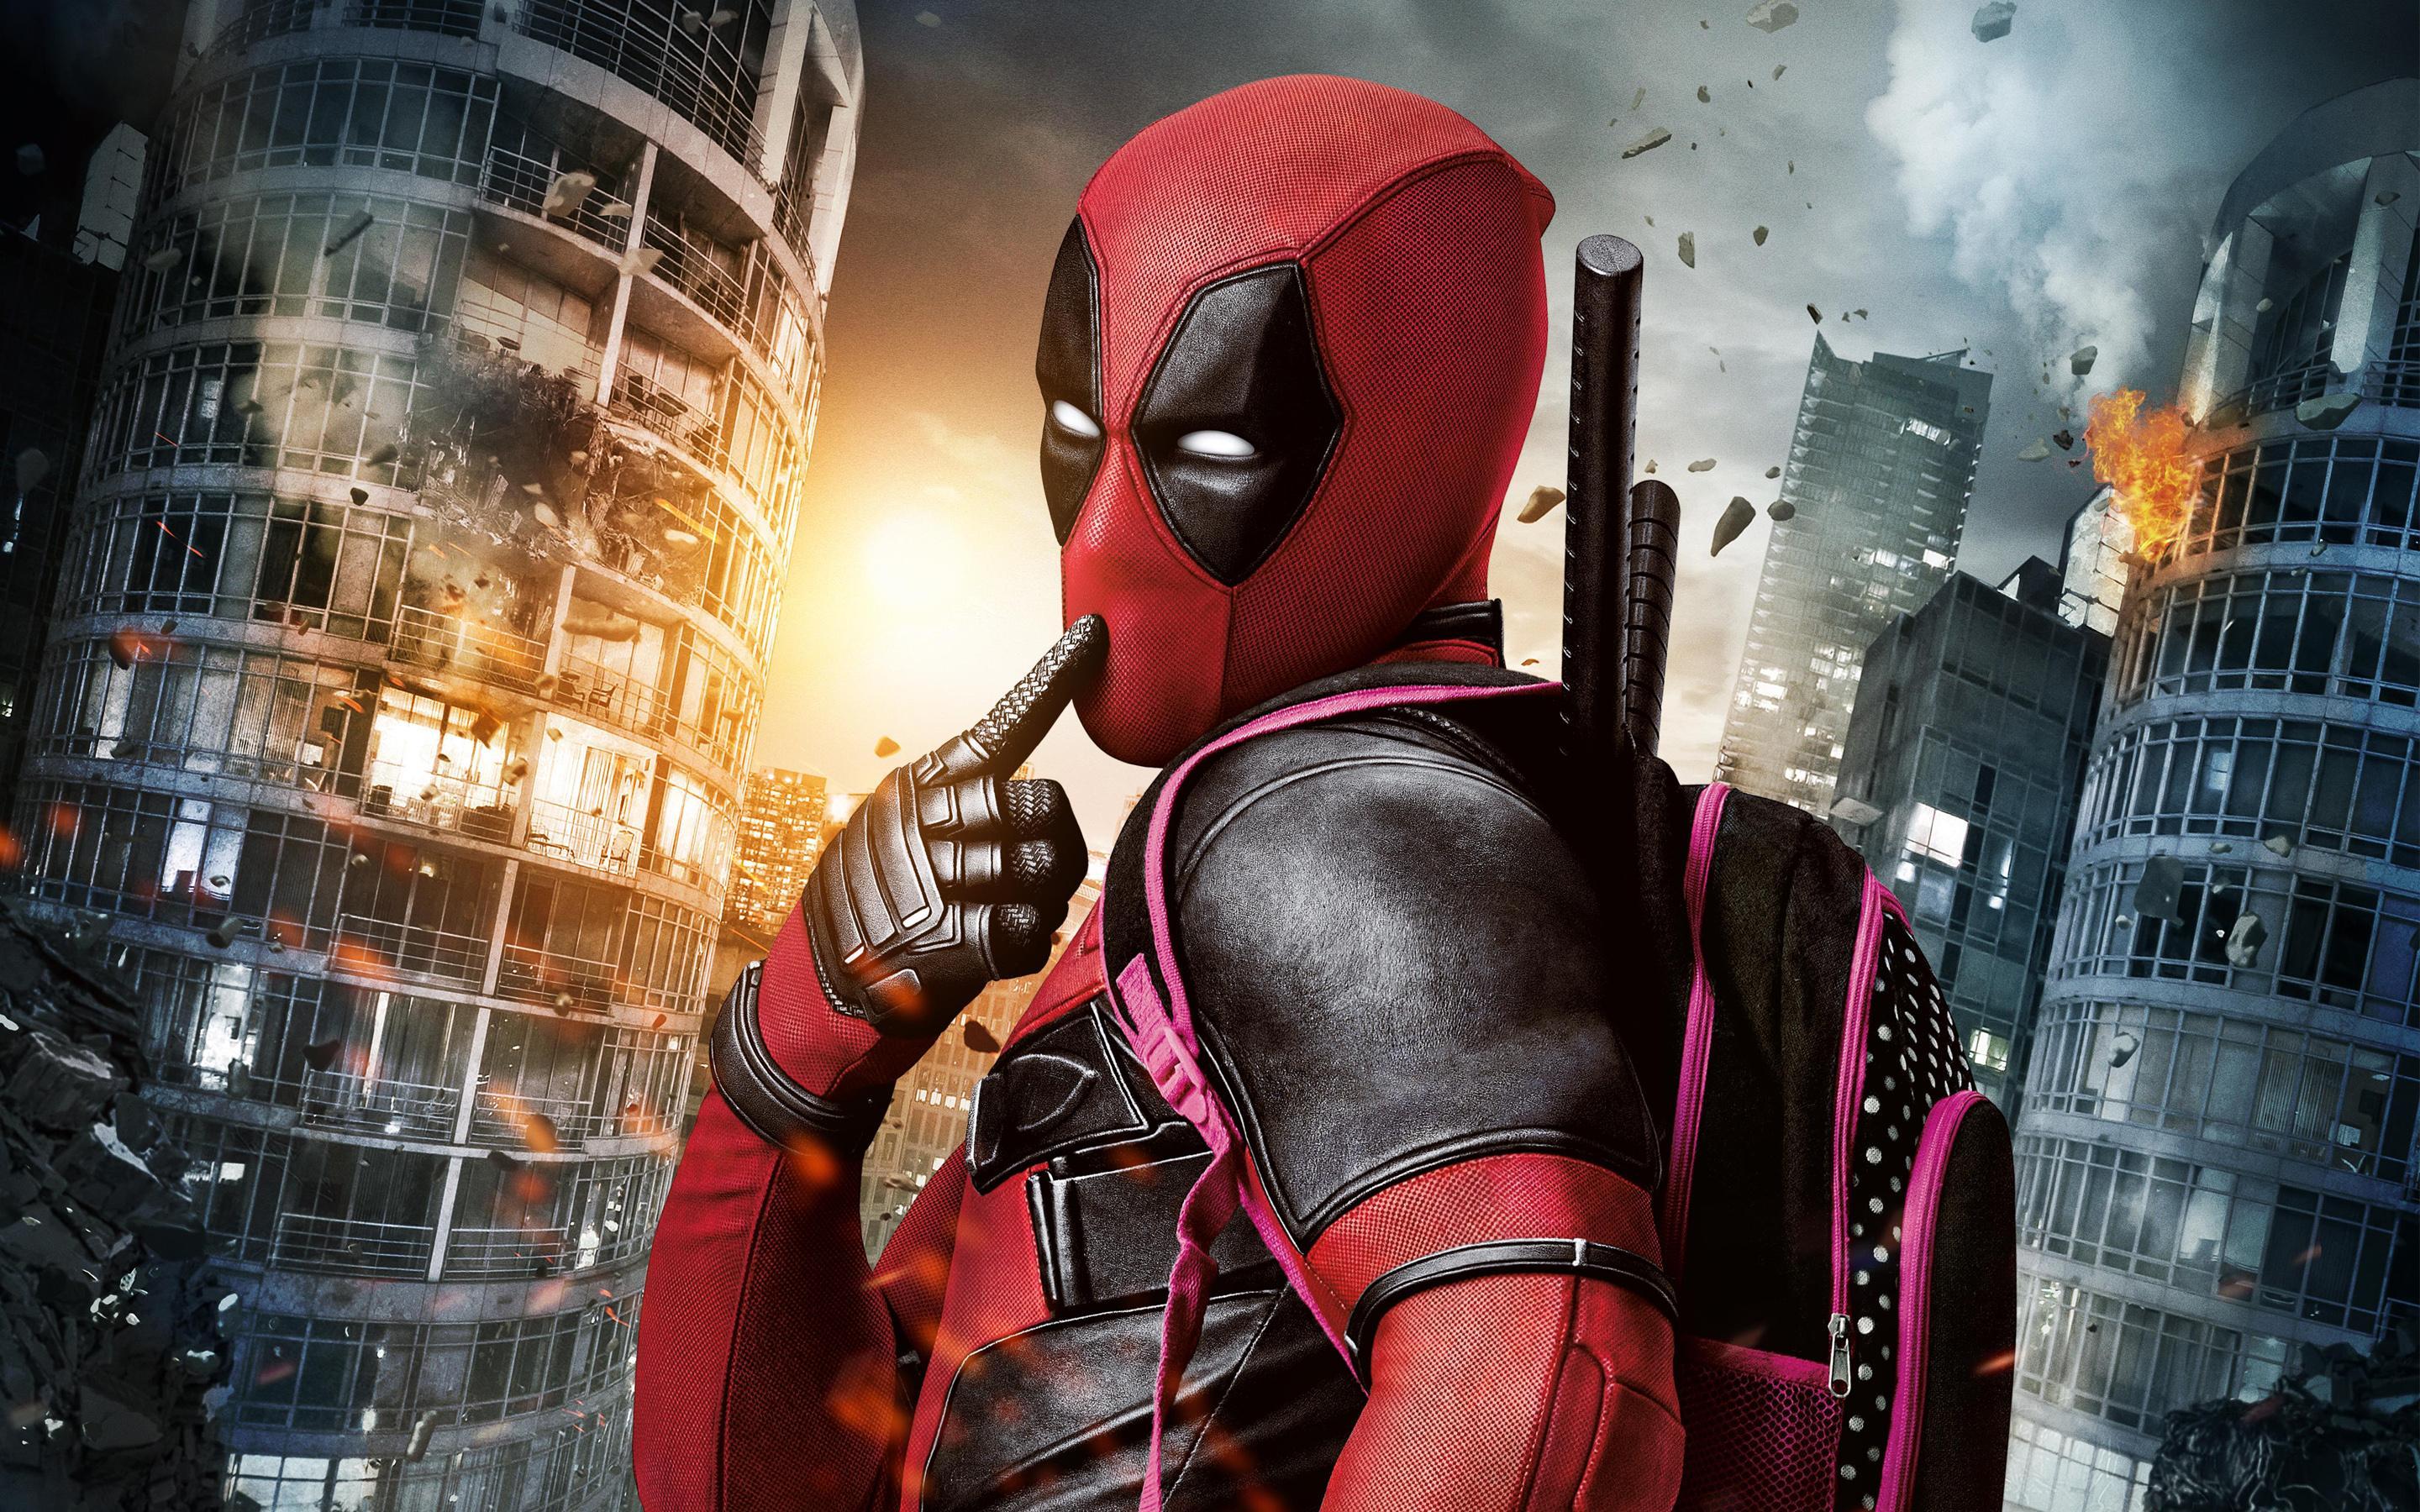 Only Eagle Eyed 'Deadpool' Fans Caught This 'Deadpool 2